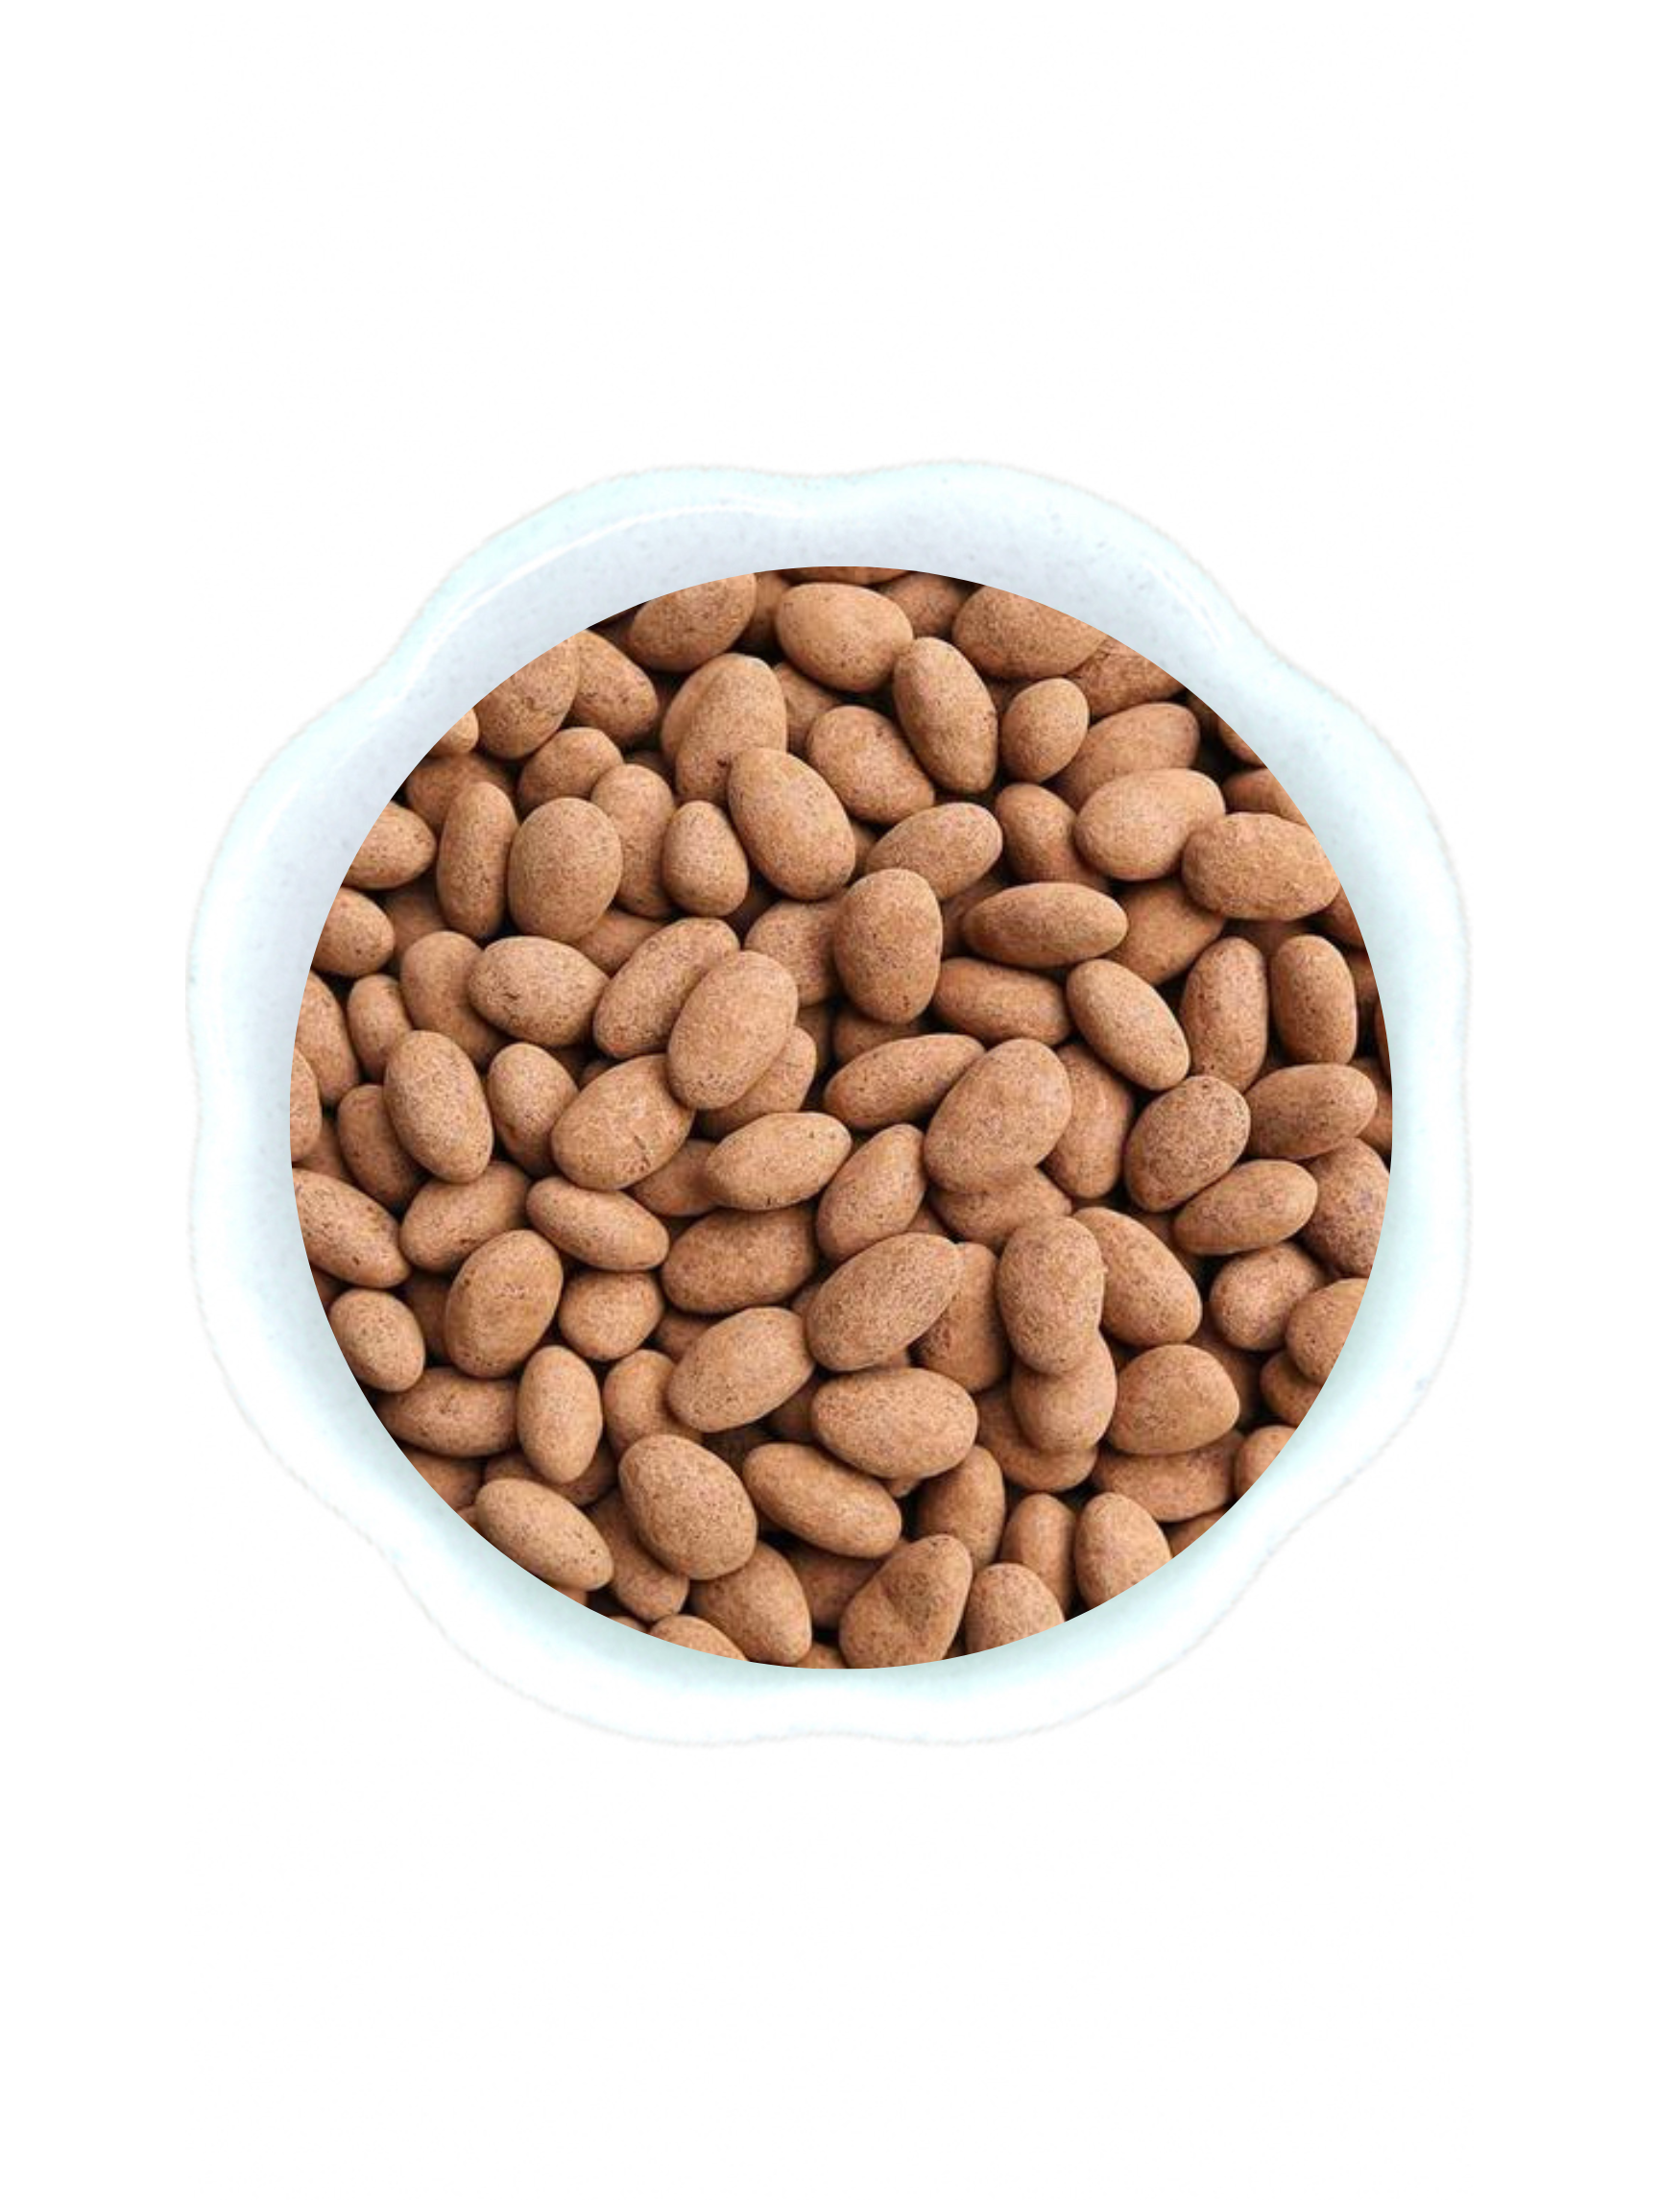 Dark Chocolate Covered Almonds - Calgary Pick Up only due to hot weather